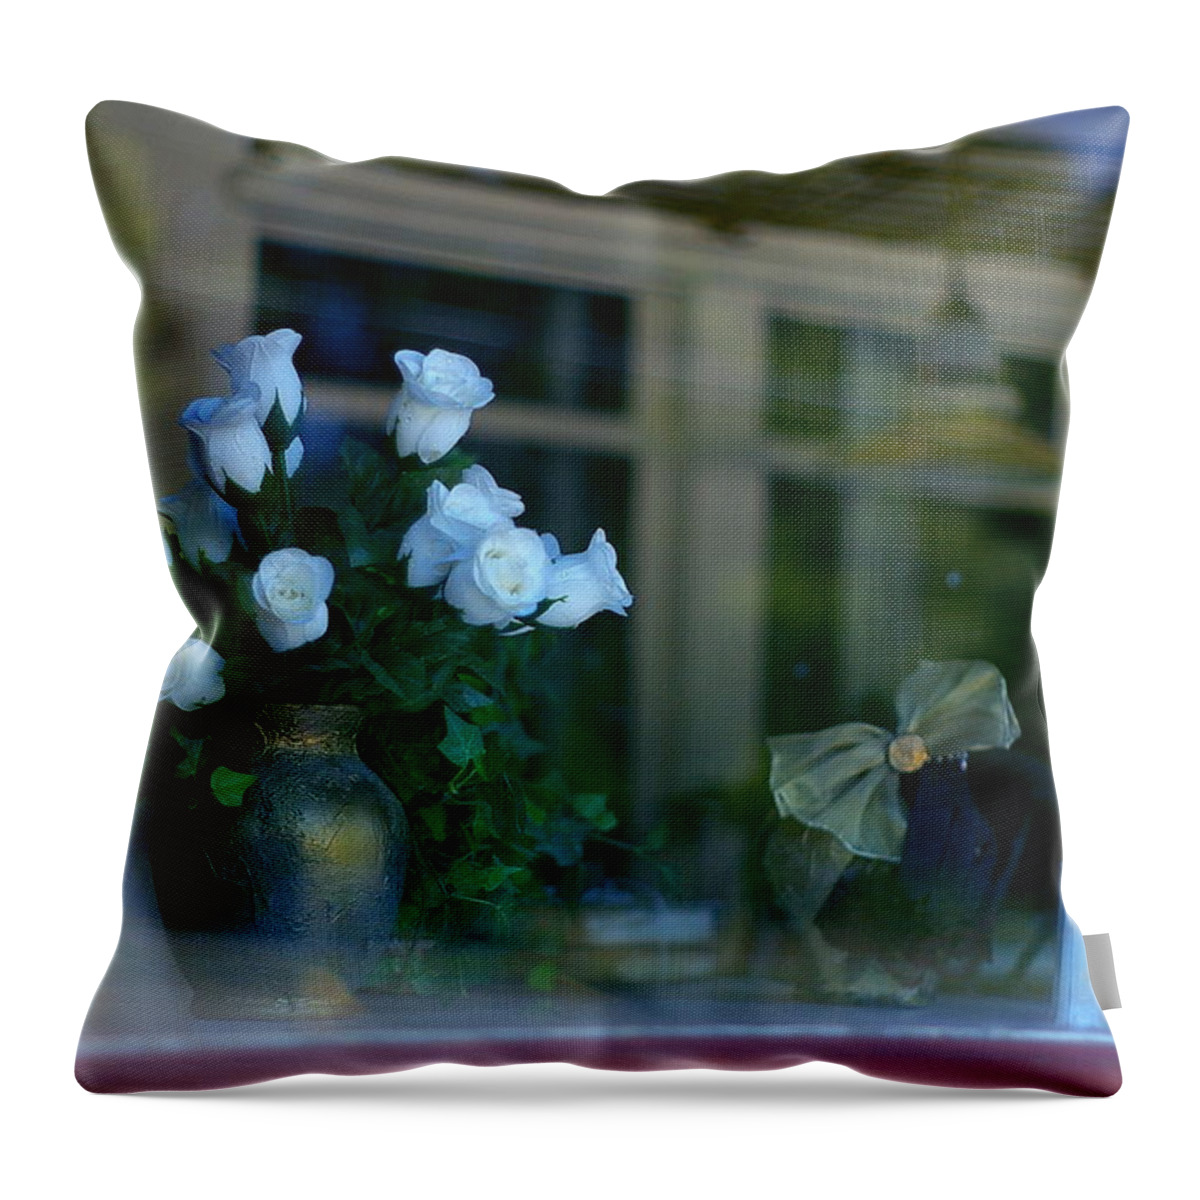 Diner Throw Pillow featuring the photograph White Roses Diner by Randy Pollard